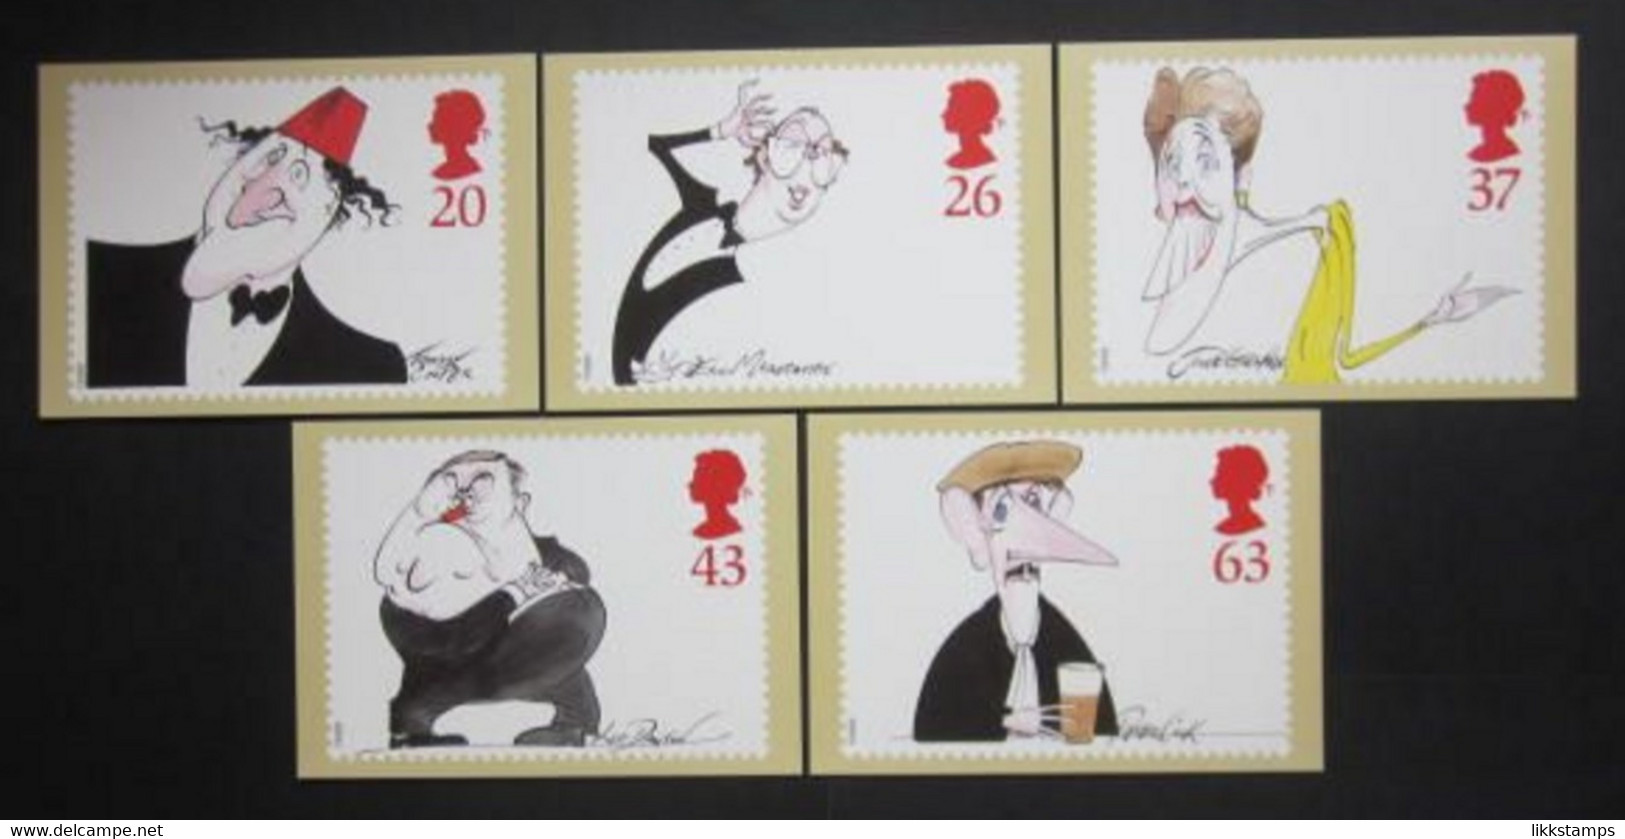 1998 COMEDIANS P.H.Q. CARDS UNUSED, ISSUE No. 197 (B) #00954 - Carte PHQ